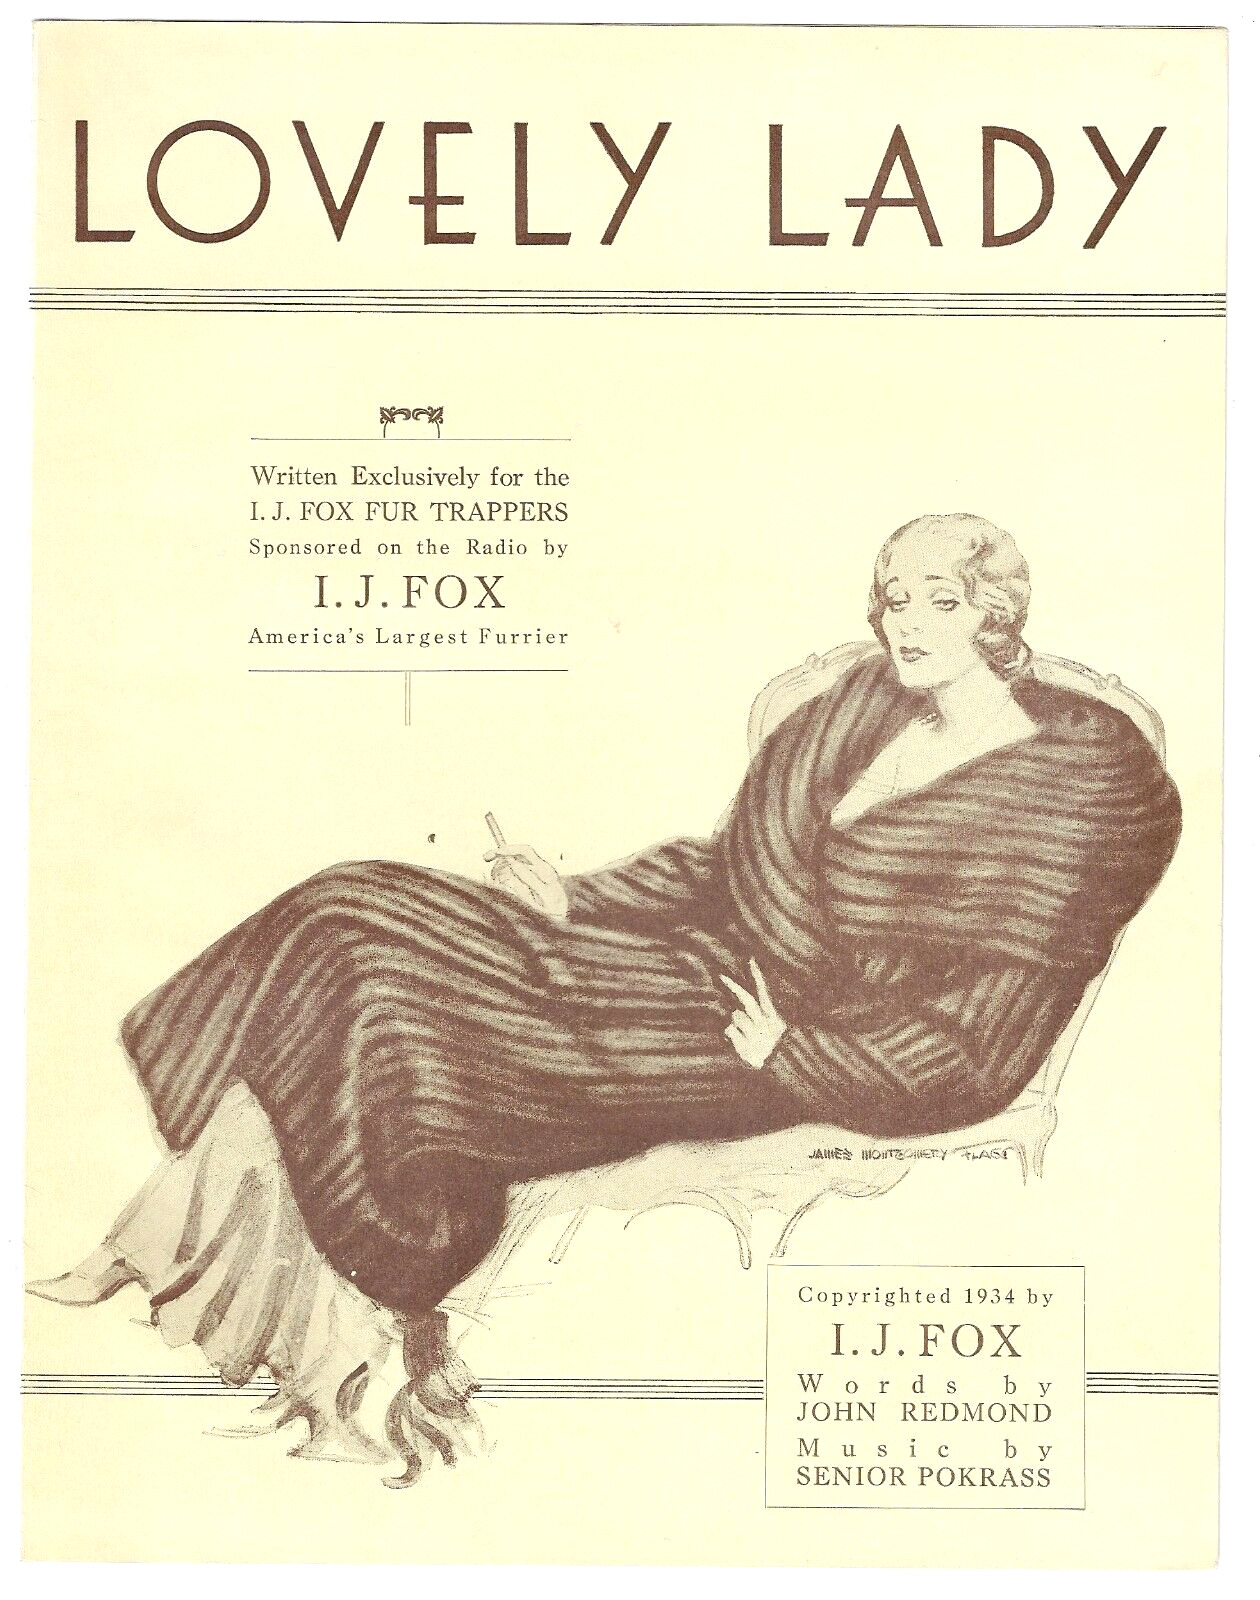 rare Vintage Advertisement Sheet Music LOVELY LADY 1934  I.J. FOX FUR TRAPPERS